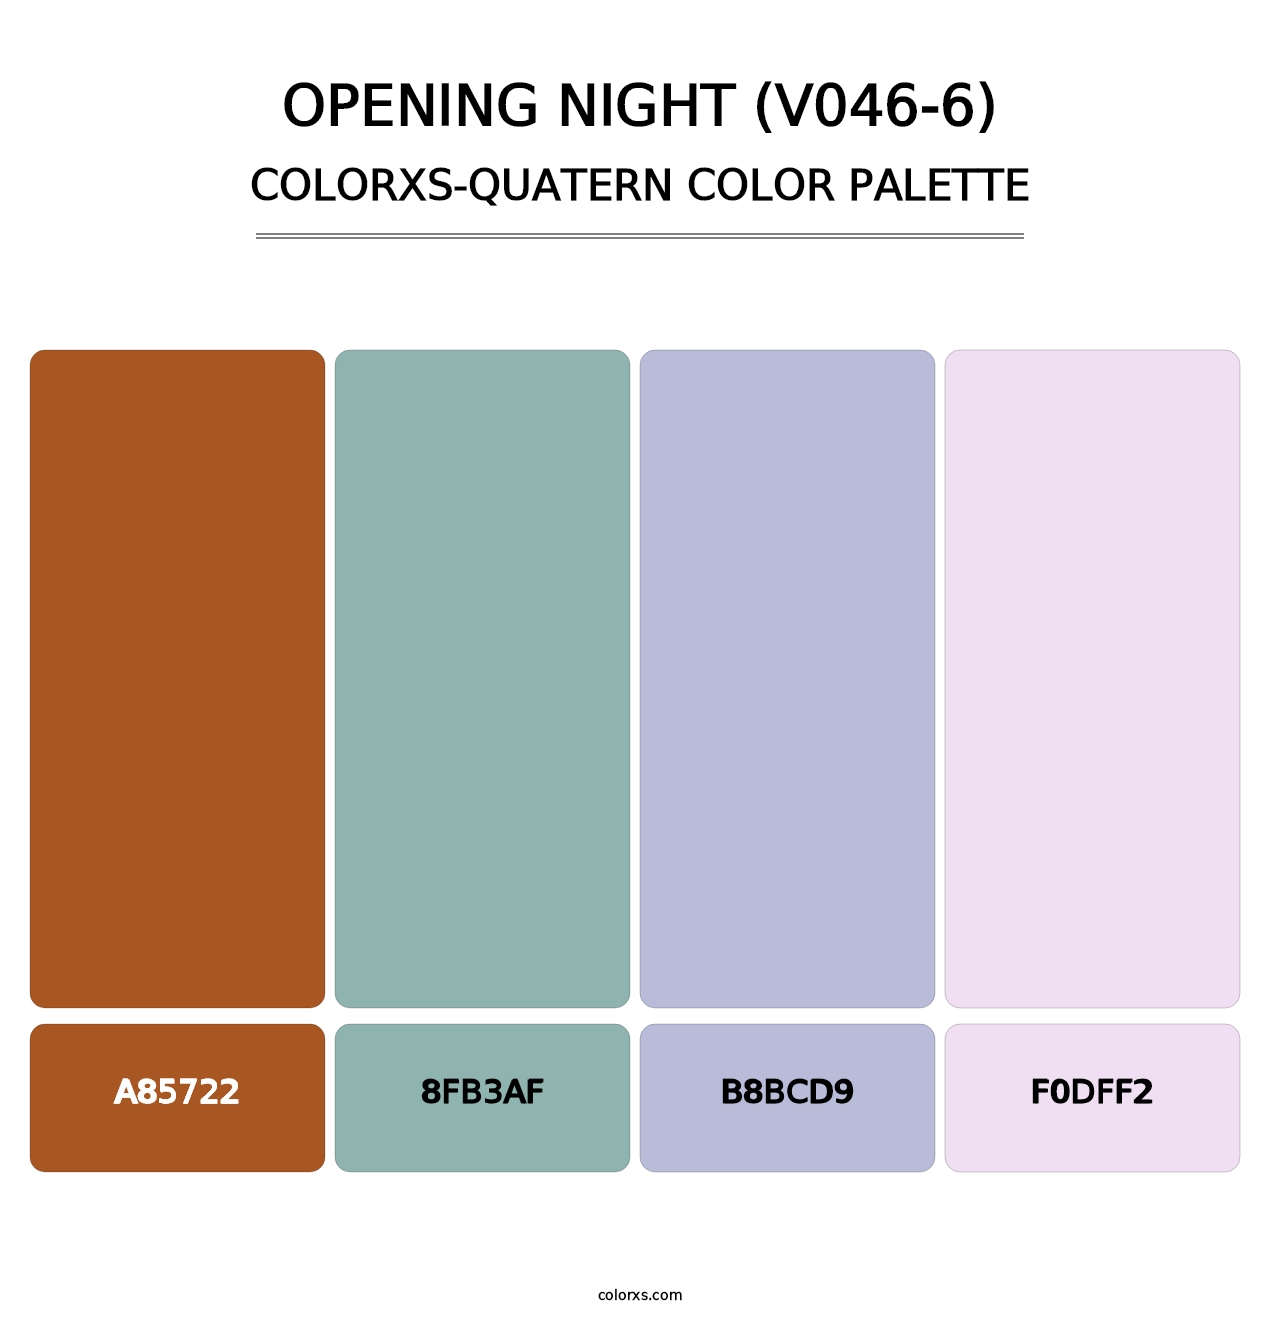 Opening Night (V046-6) - Colorxs Quatern Palette